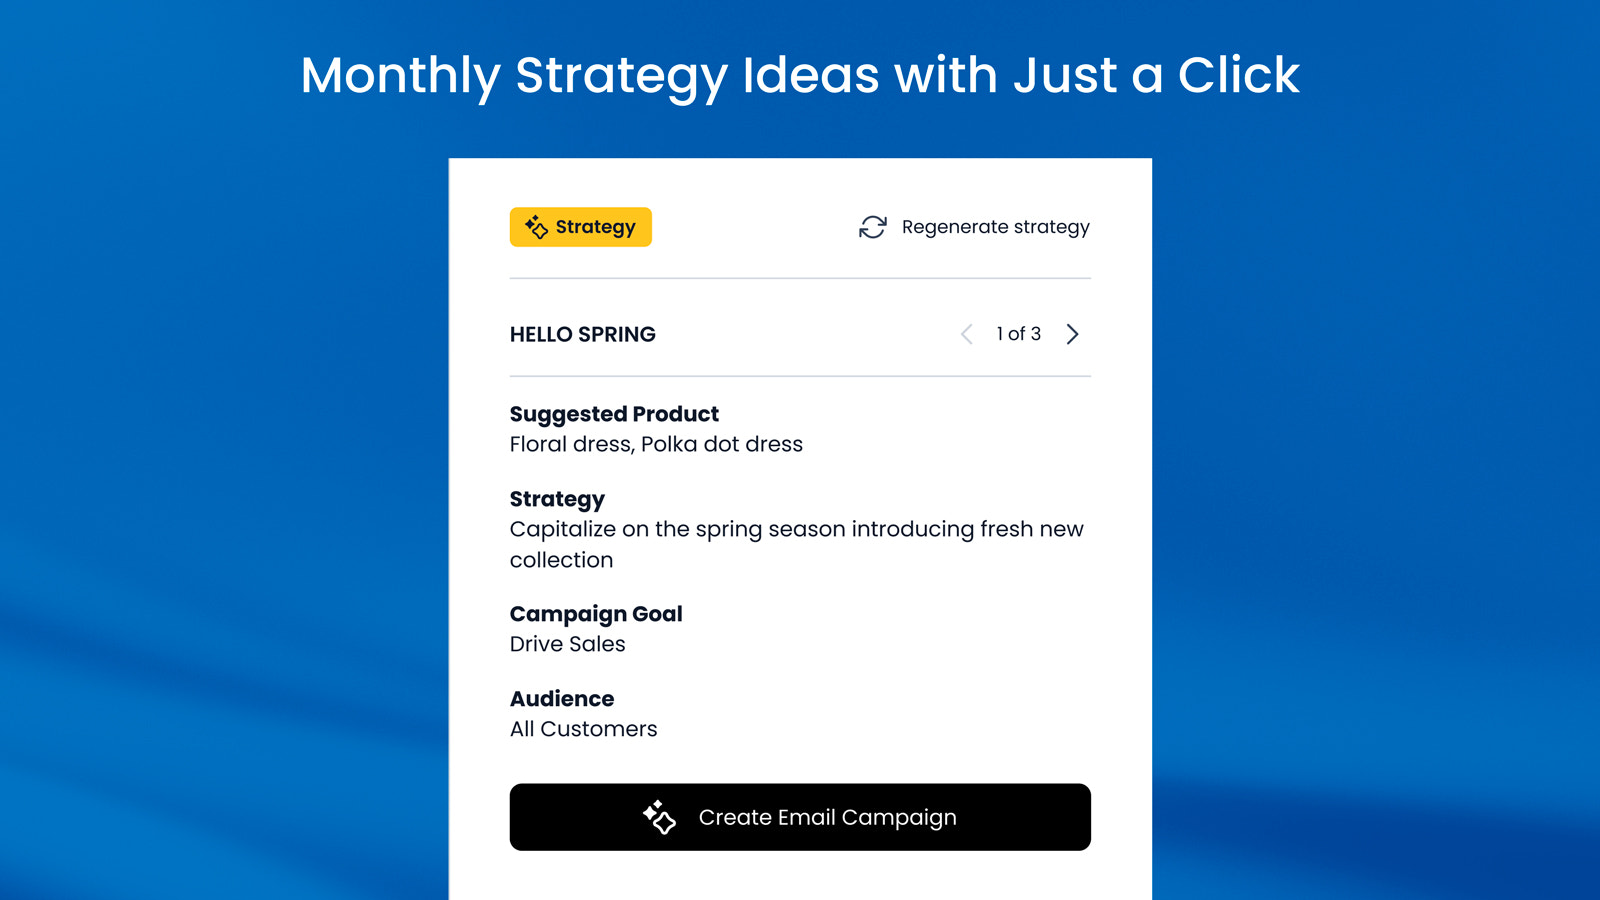 Effortlessly newsletter and templates on demand across the month